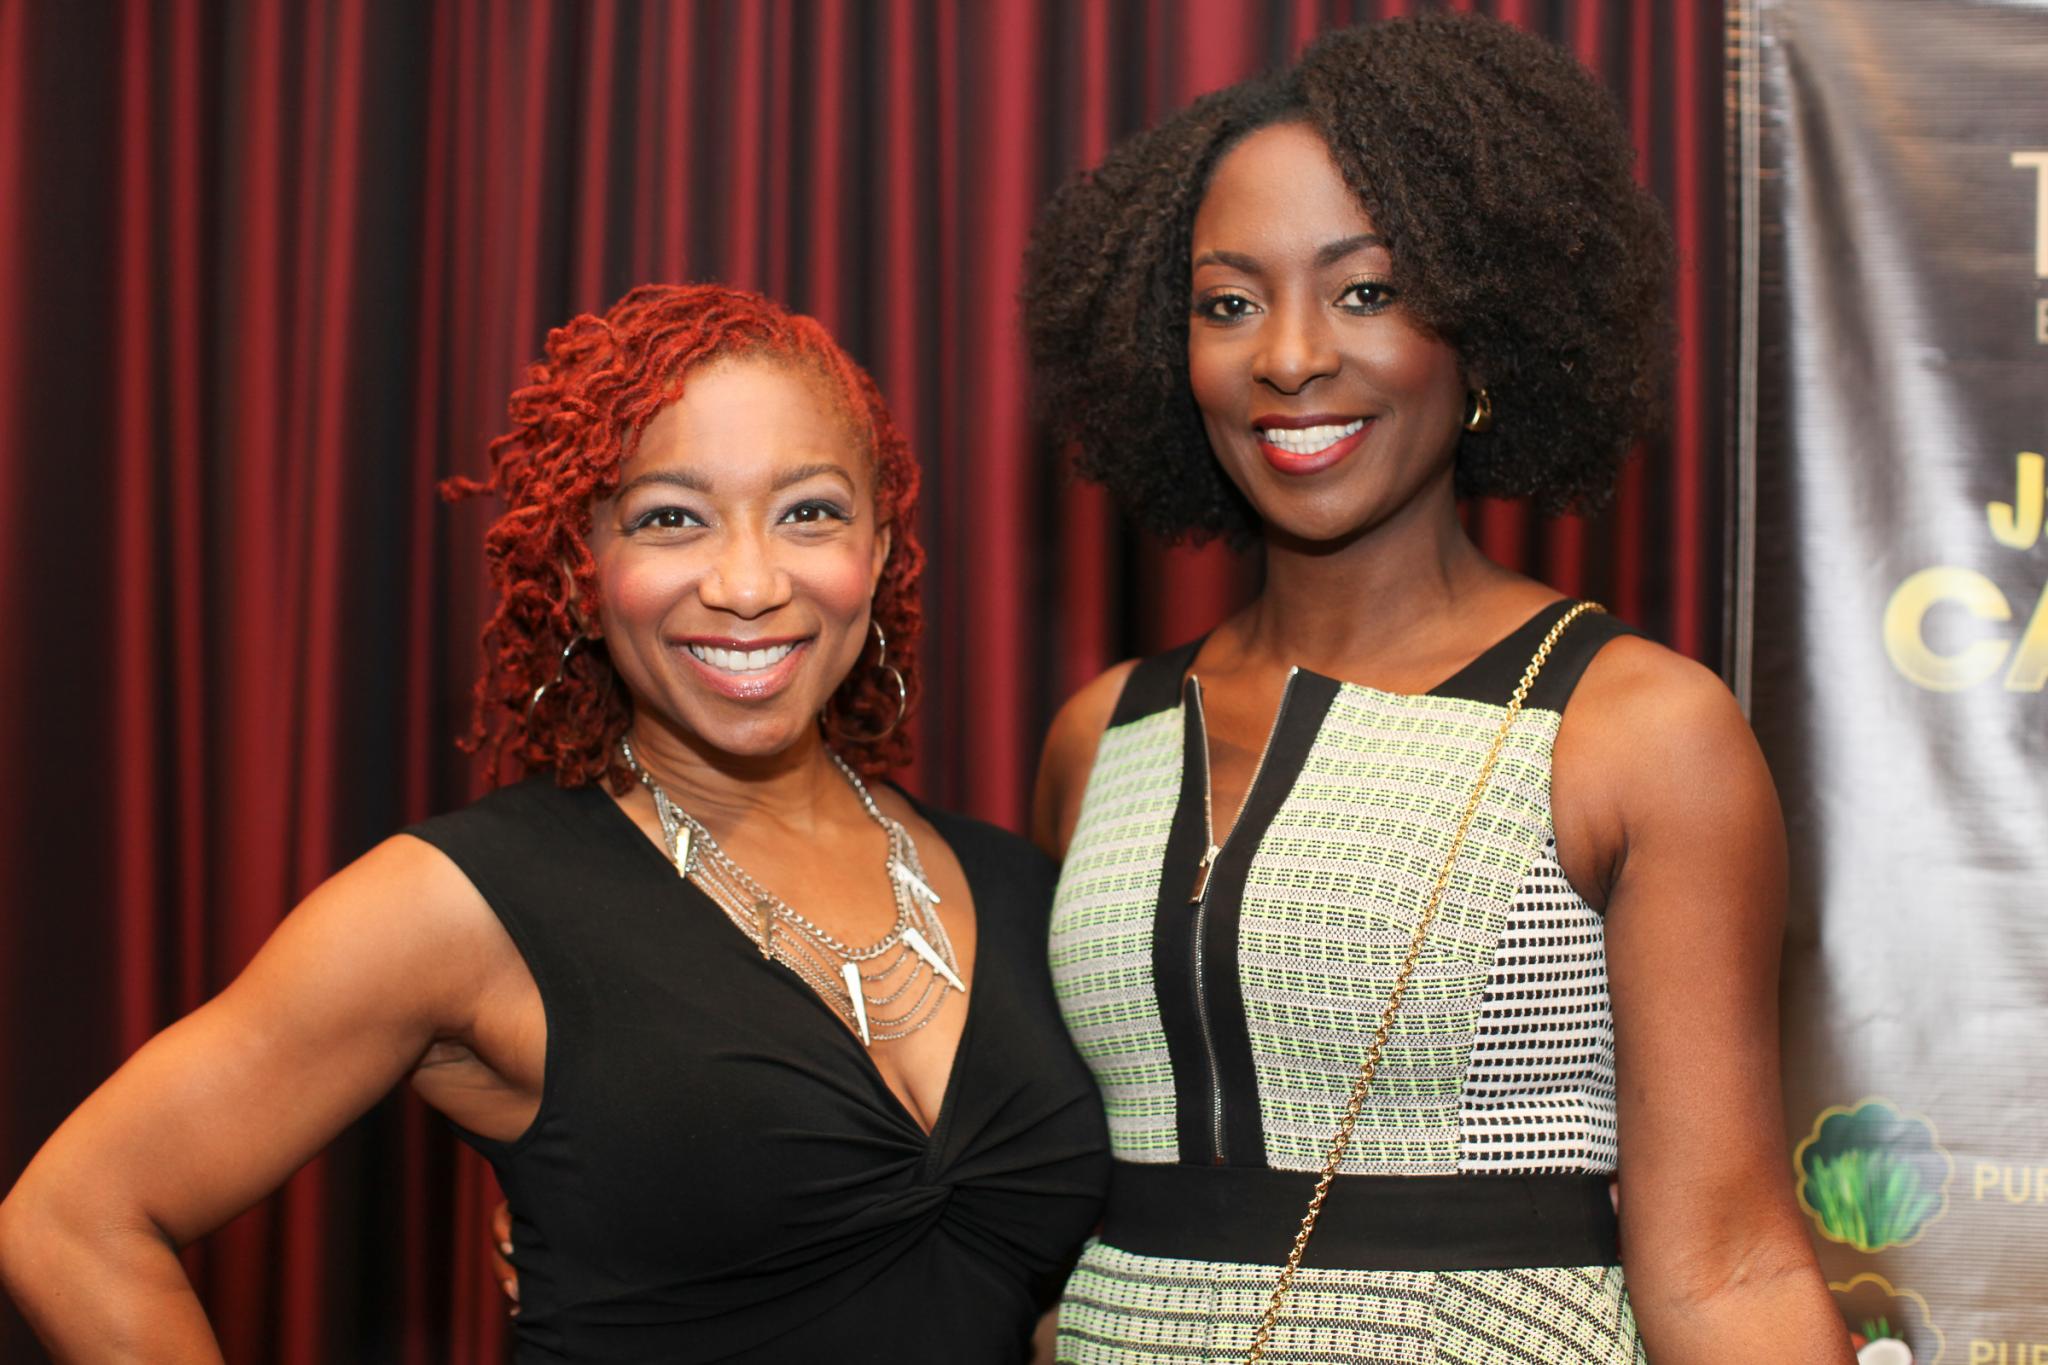 Curly Queens at the World Natural Health & Beauty Expo